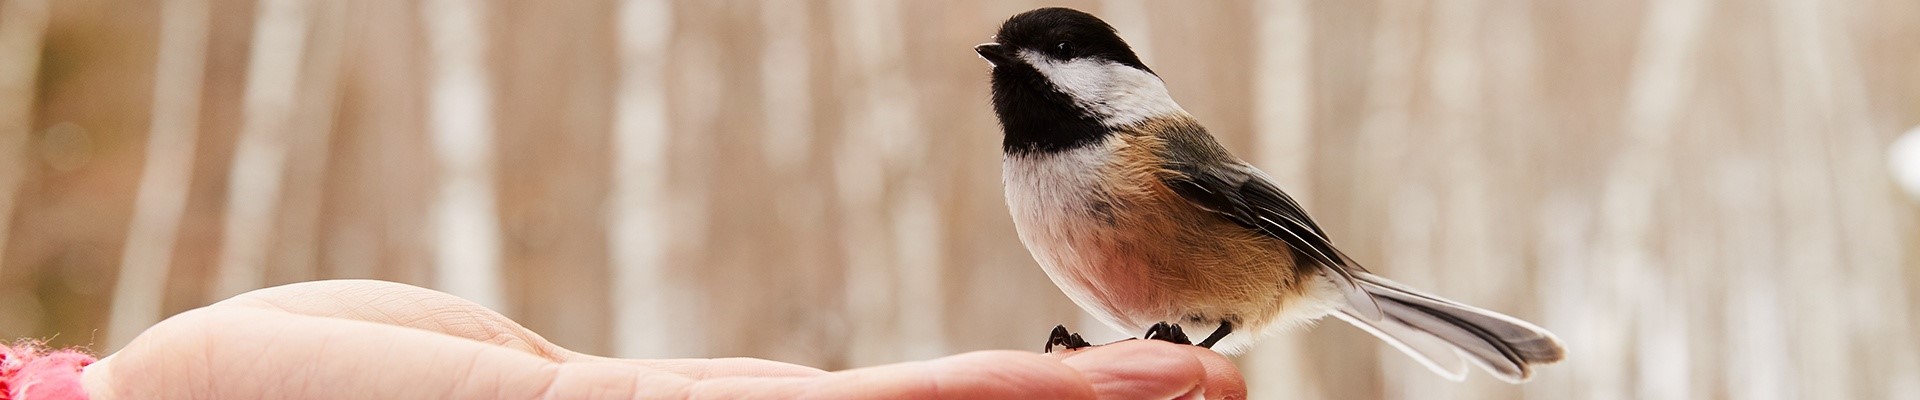 A chickadee in someones hand